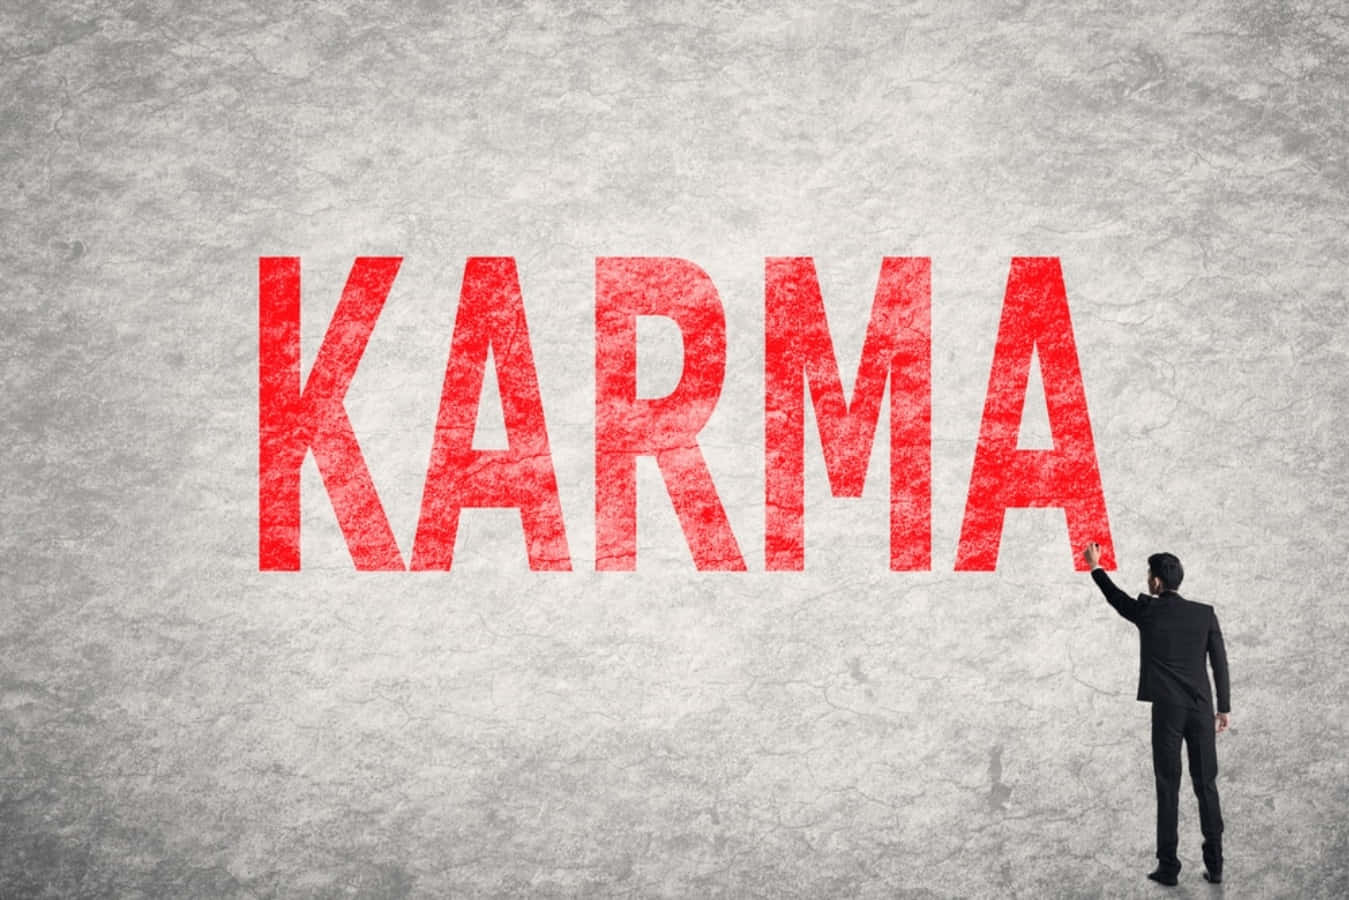 A Man In A Suit Is Pointing To The Word Karma